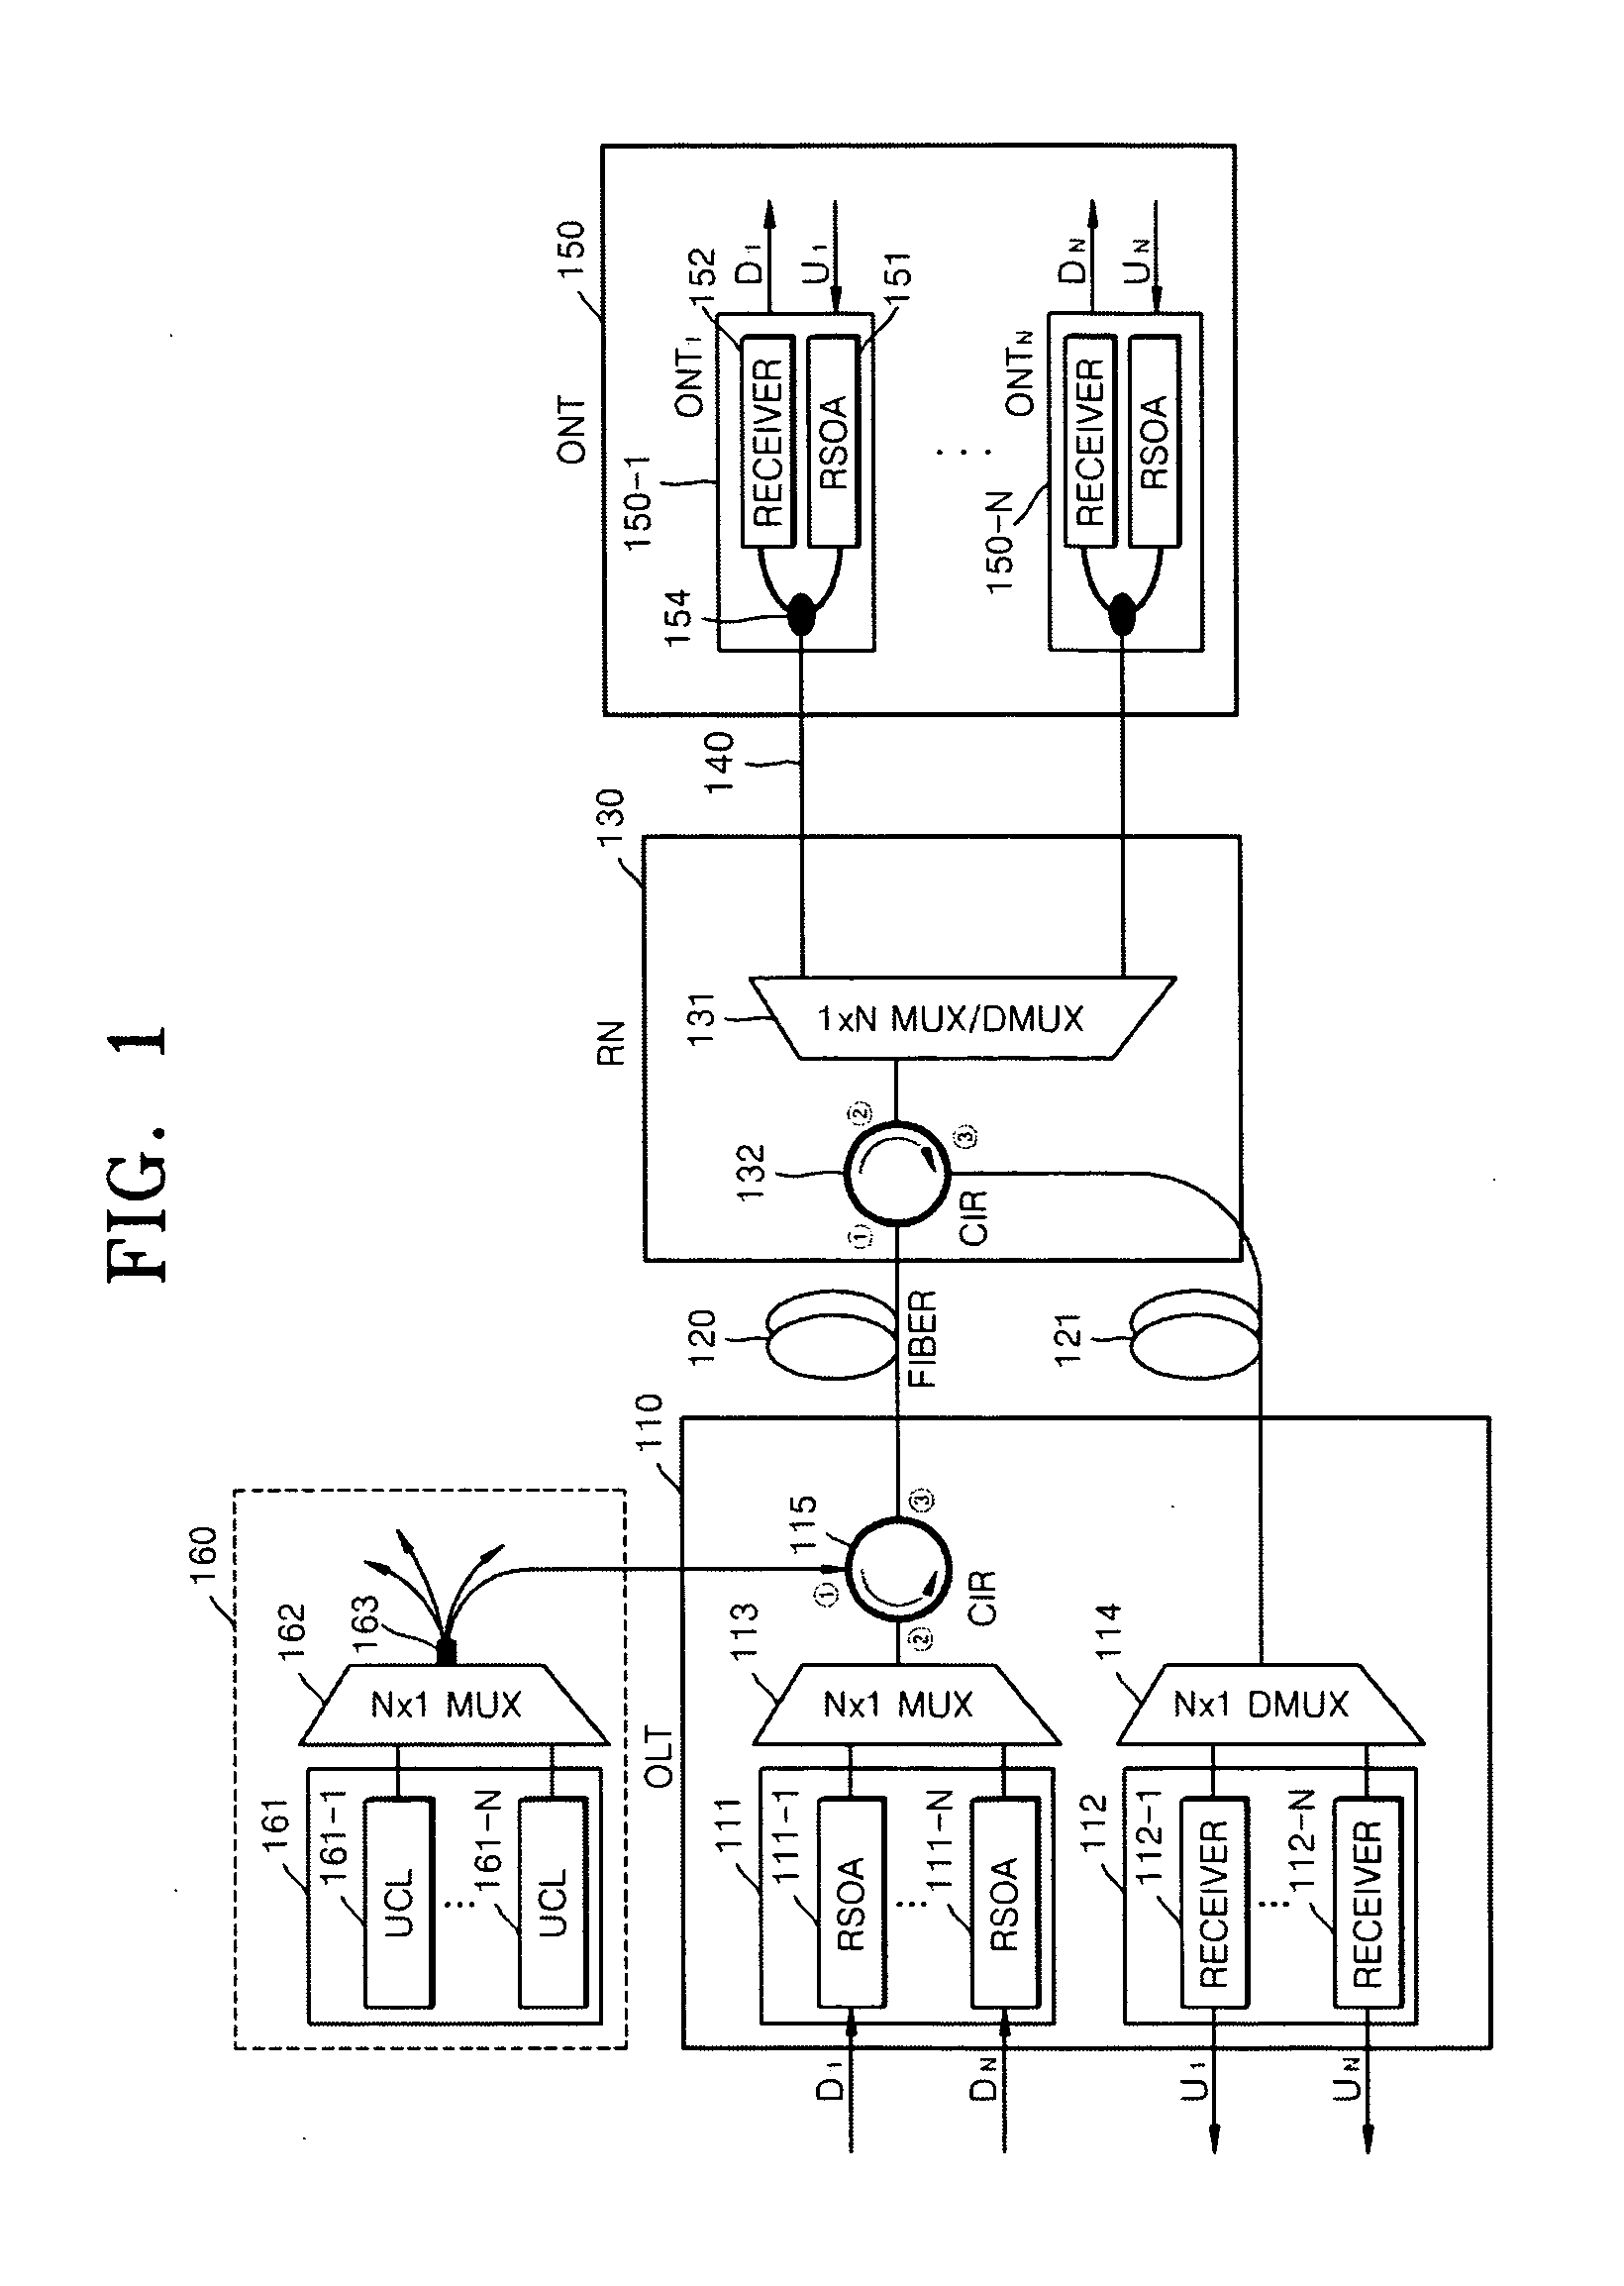 Passive Optical Network Based On Reflective Semiconductor Optical Amplifier